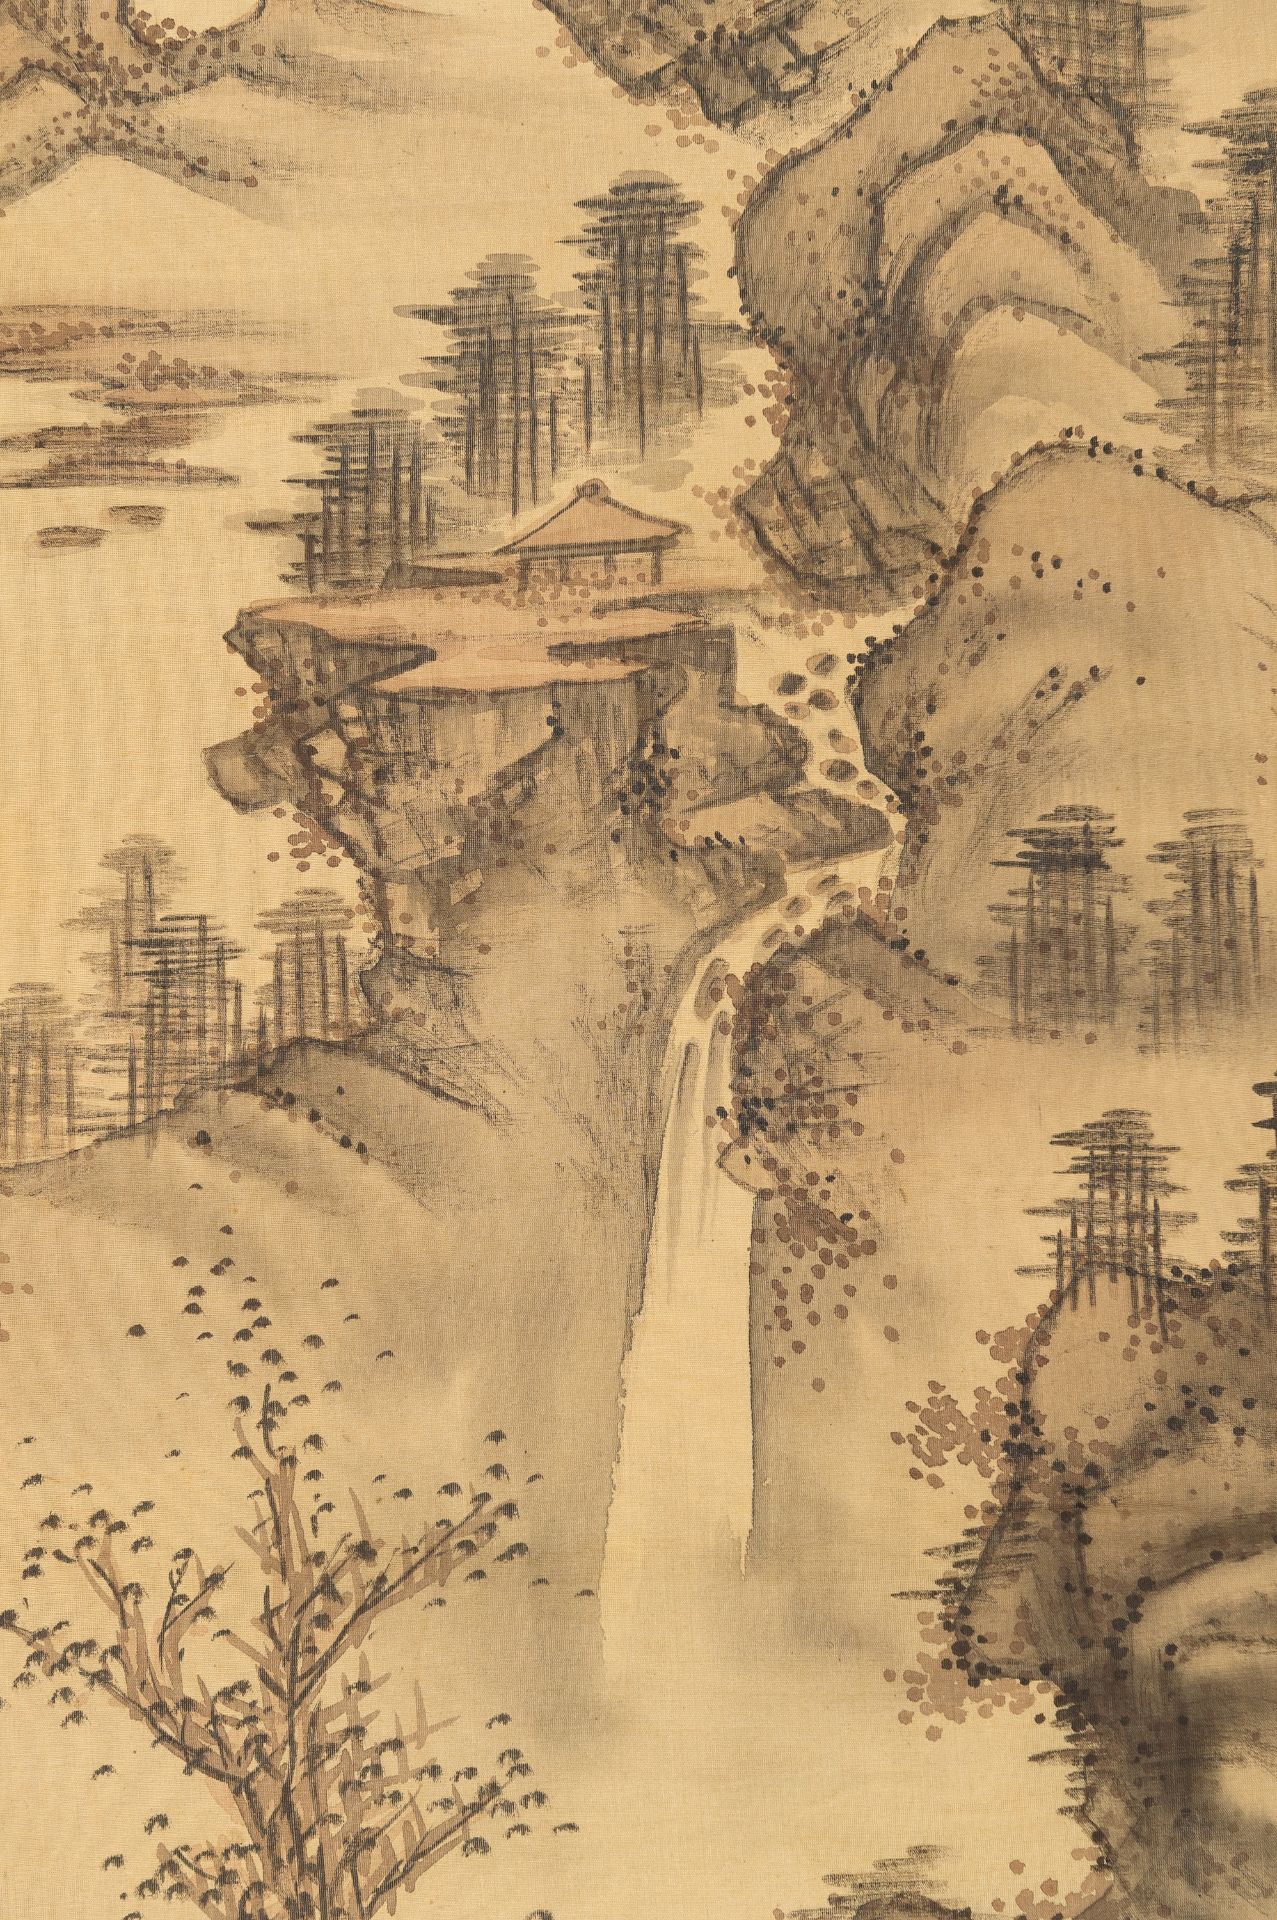 TANOMURA CHOKUNYÃ› (1814-1907): A SCROLL PAINTING OF MOUNTAINS - Image 6 of 11